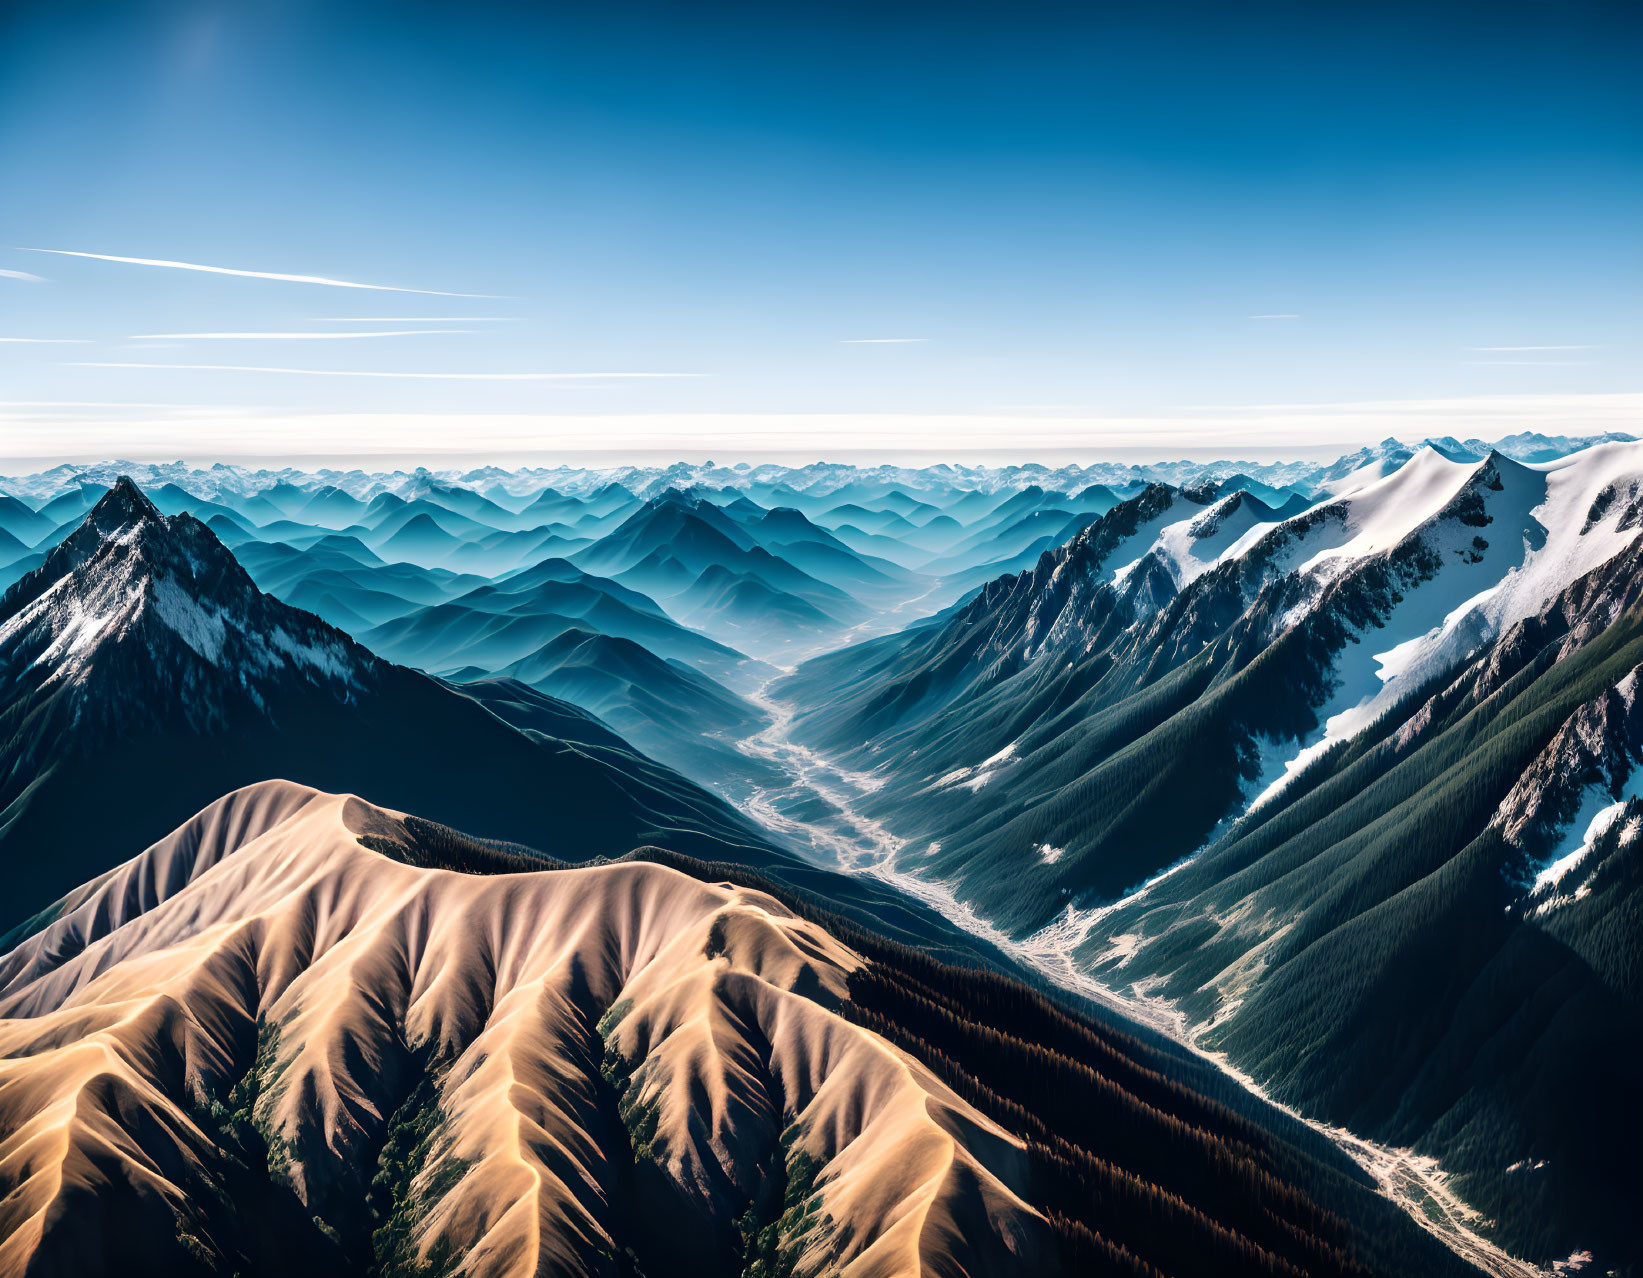 Snowy Peaks and Shadowy Valleys: Aerial View of Layered Mountain Ranges